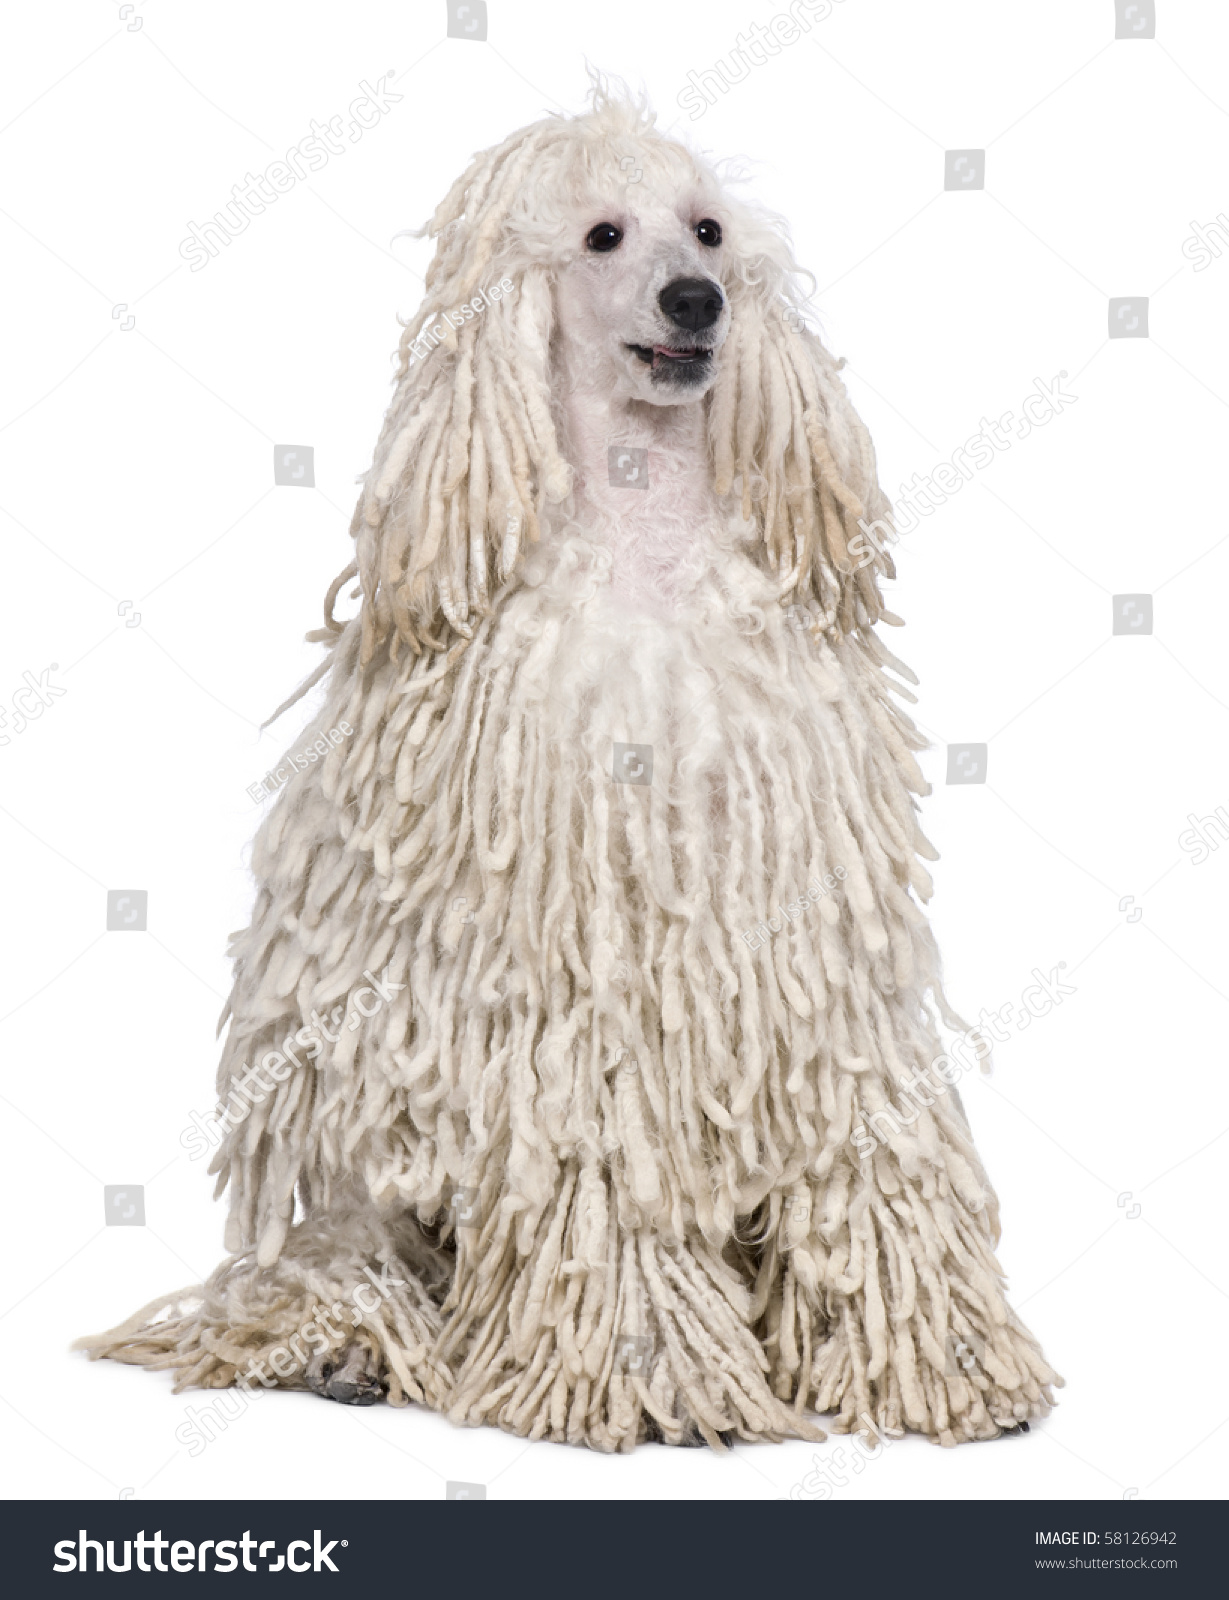 What is a corded poodle?